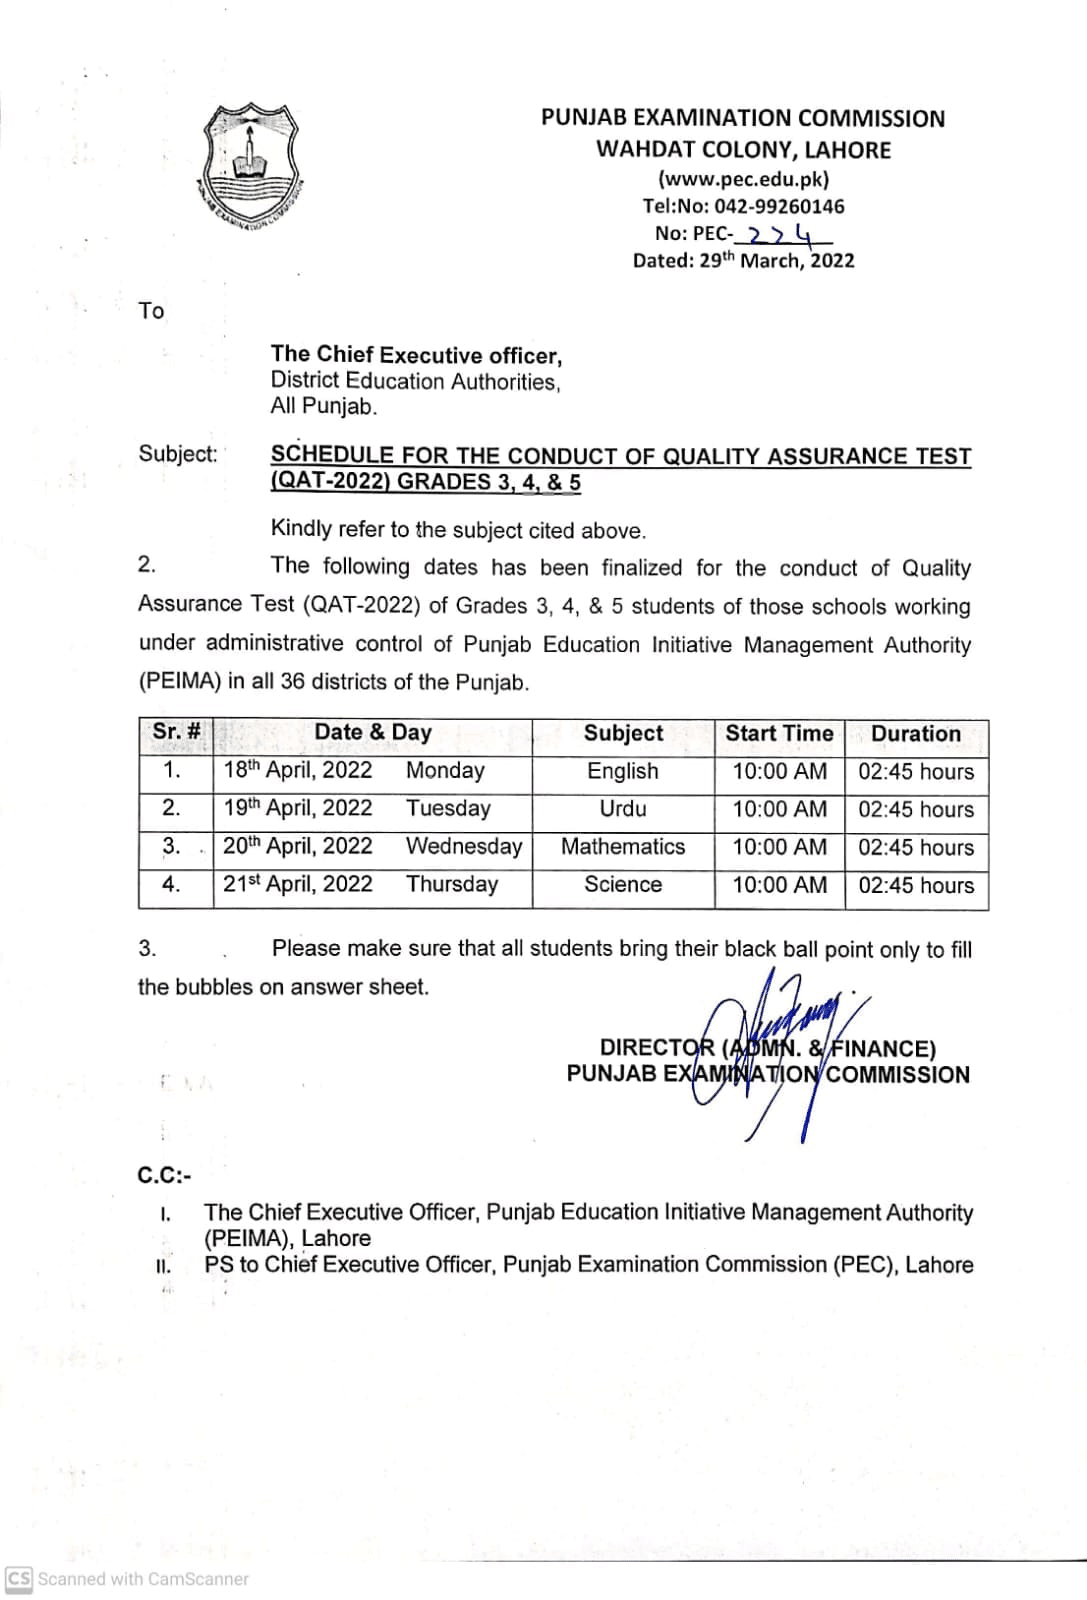 SCHEDULE FOR THE CONDUCT OF QUALITY ASSURANCE TEST (QAT-2022)